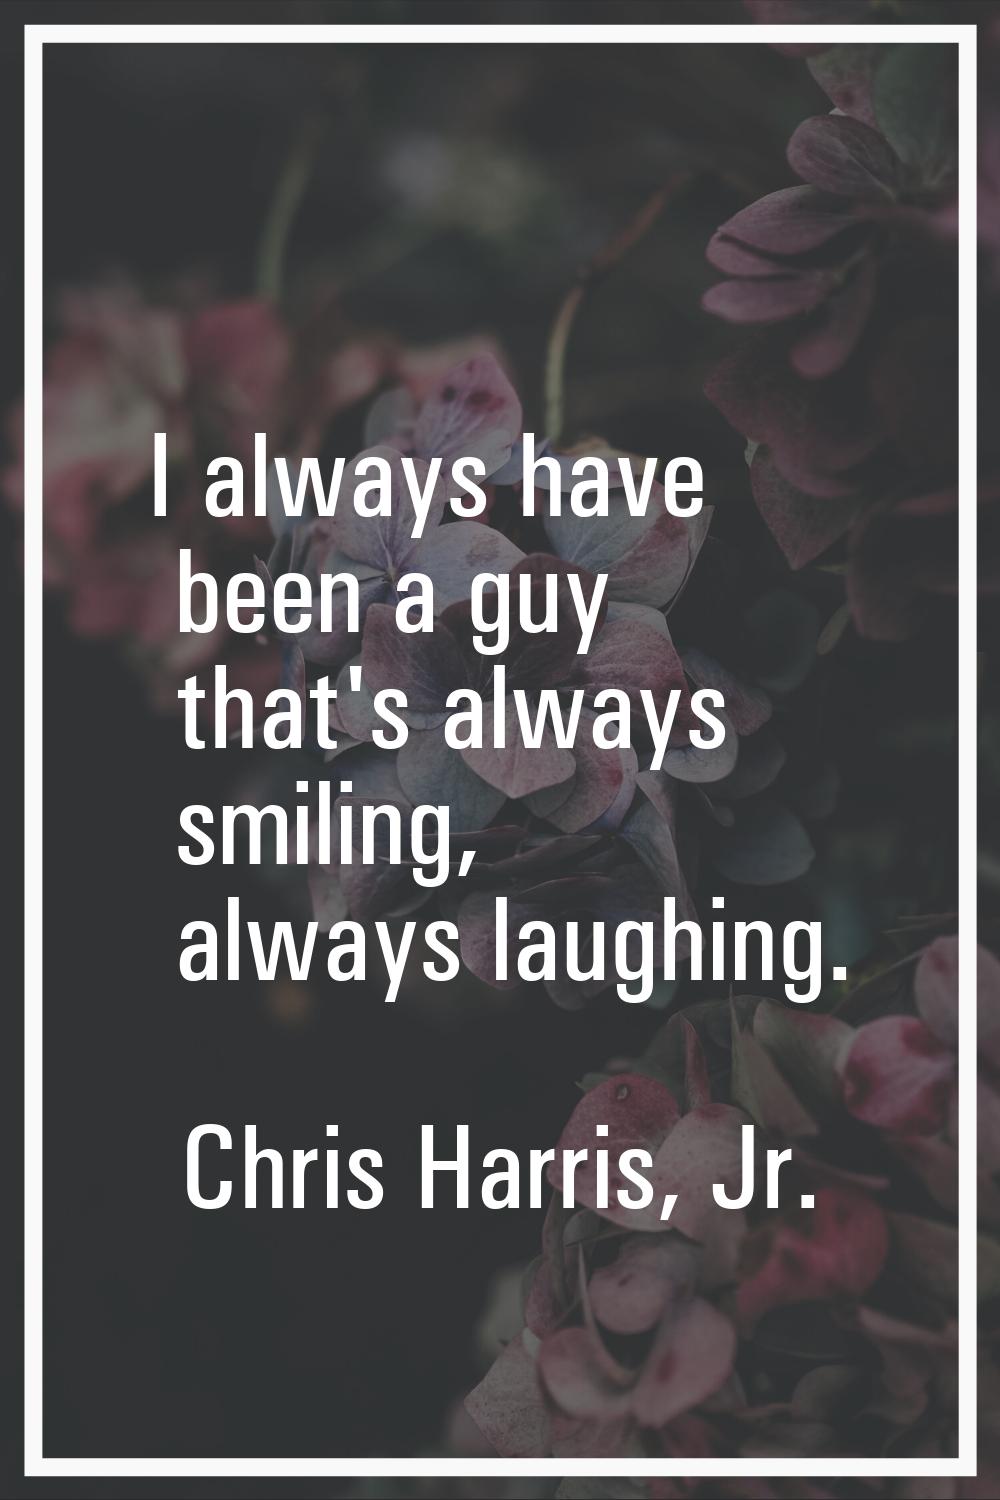 I always have been a guy that's always smiling, always laughing.